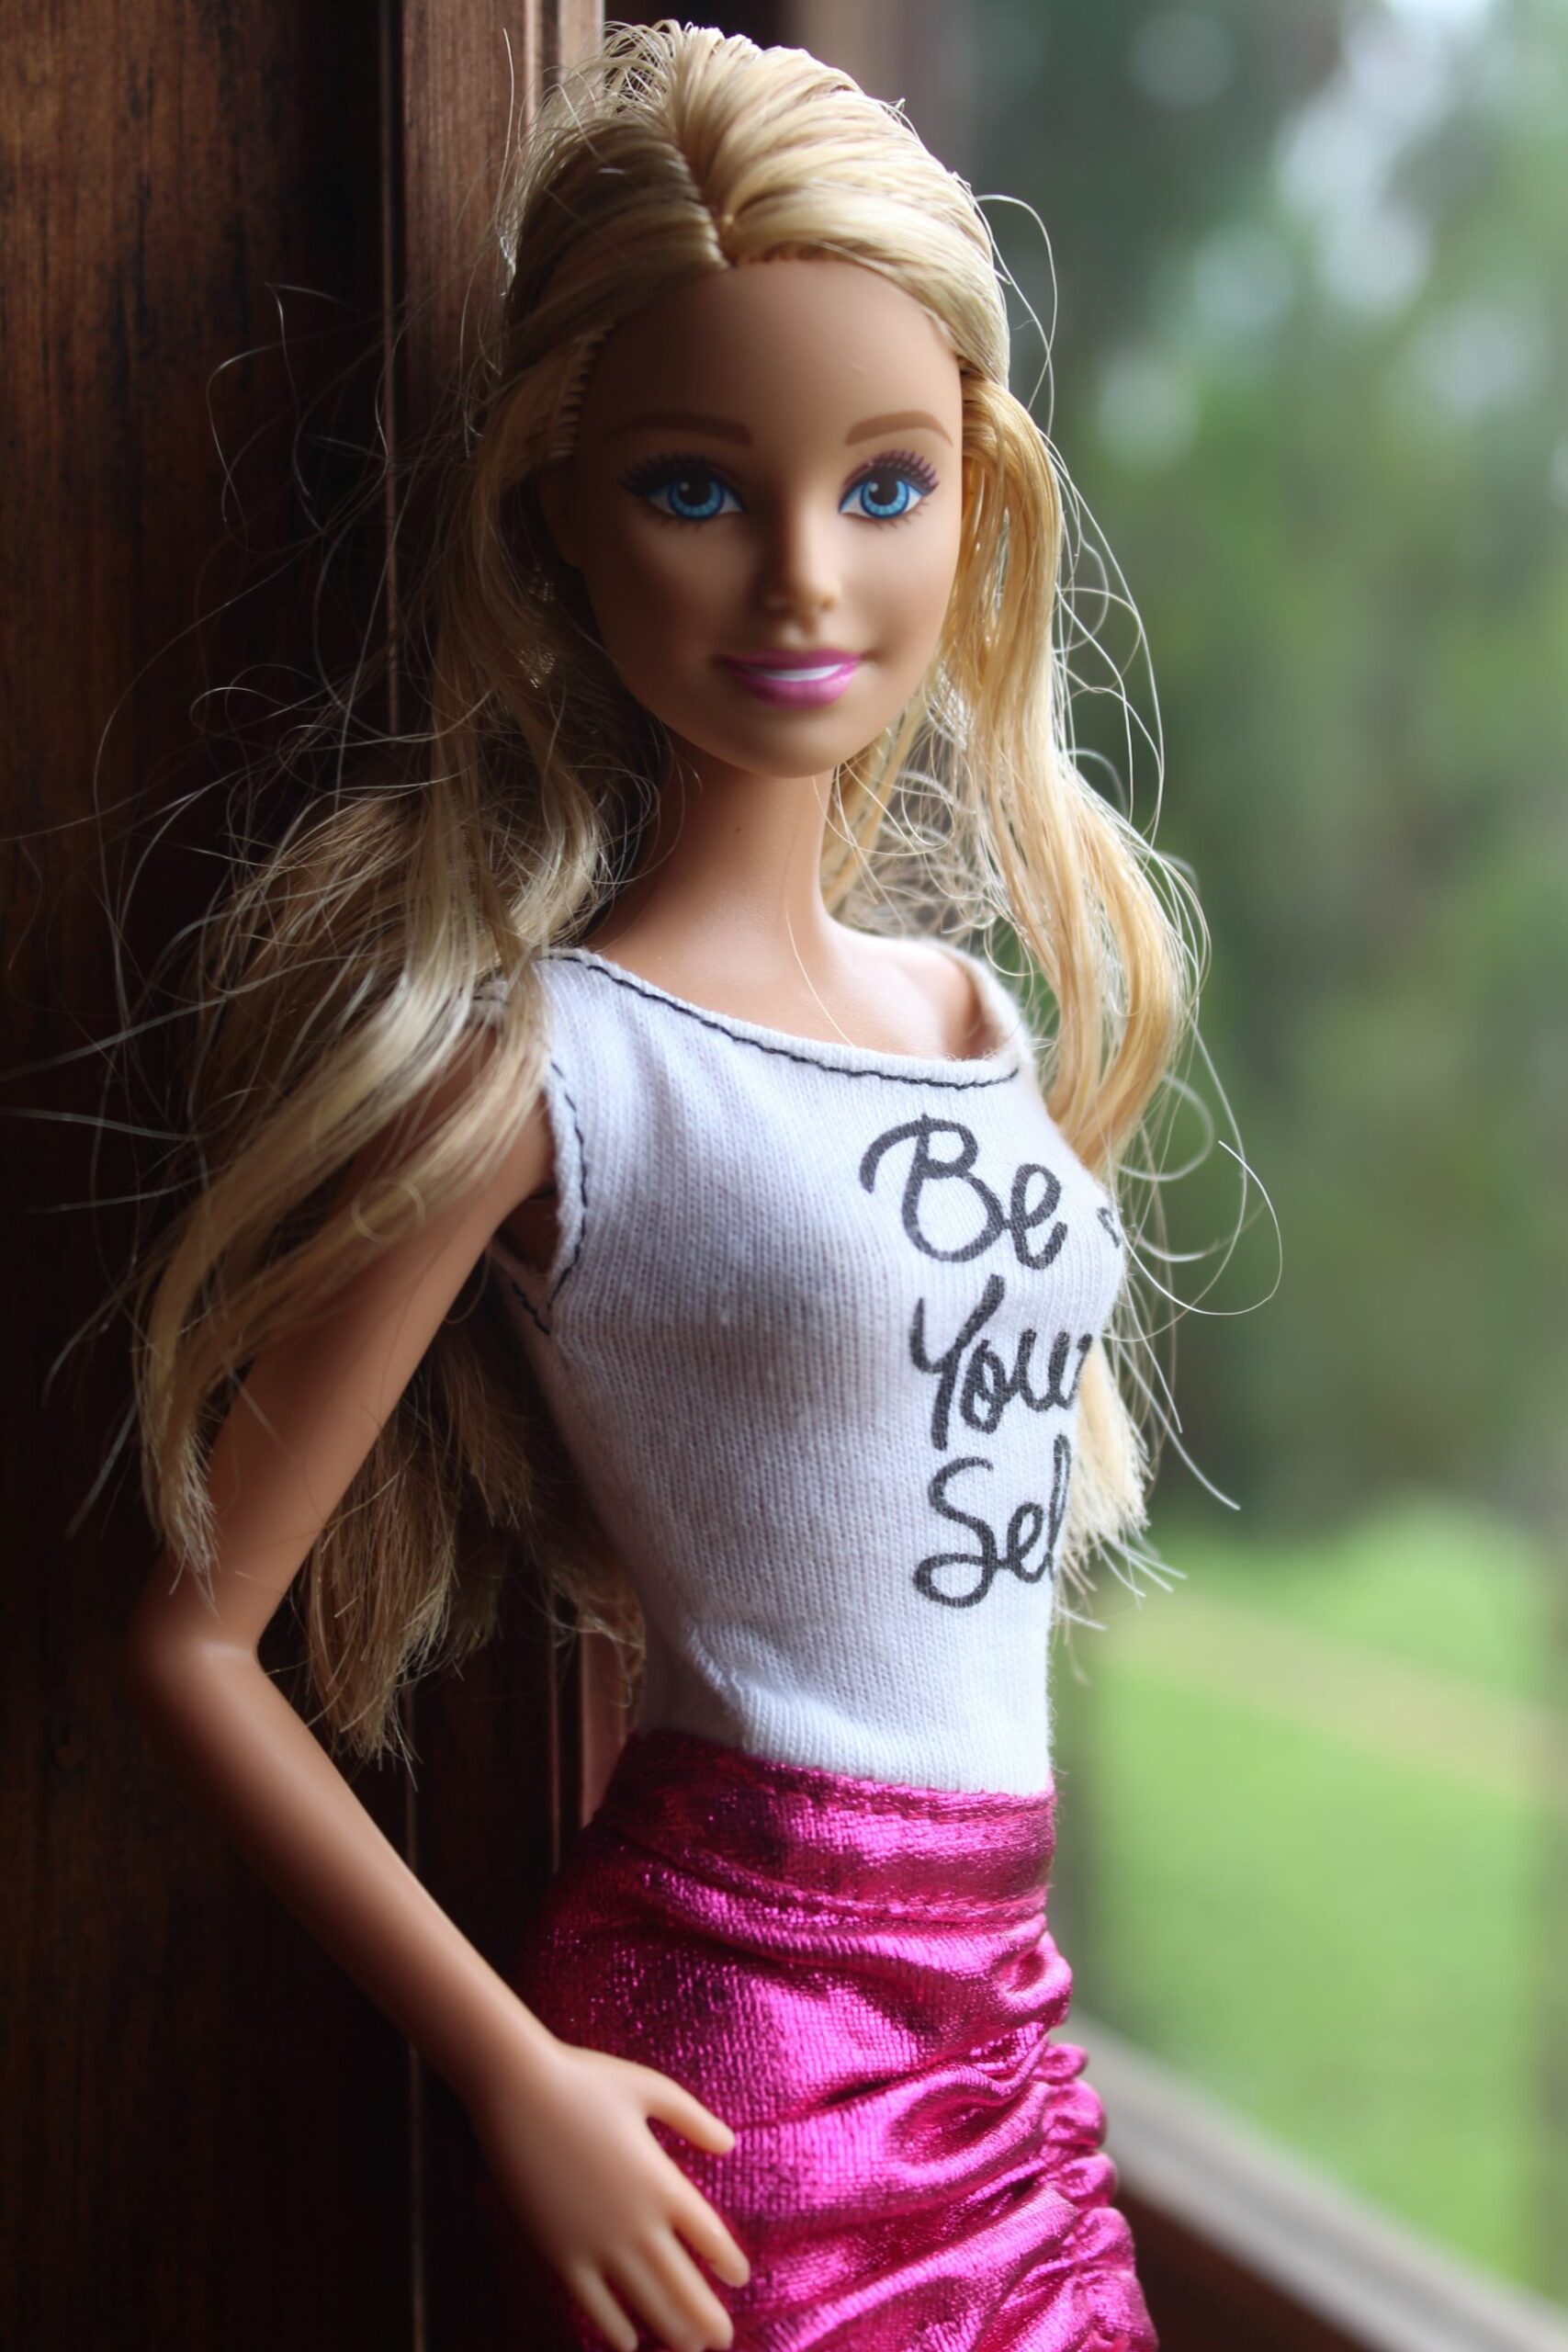 An image of a Barbie Doll.